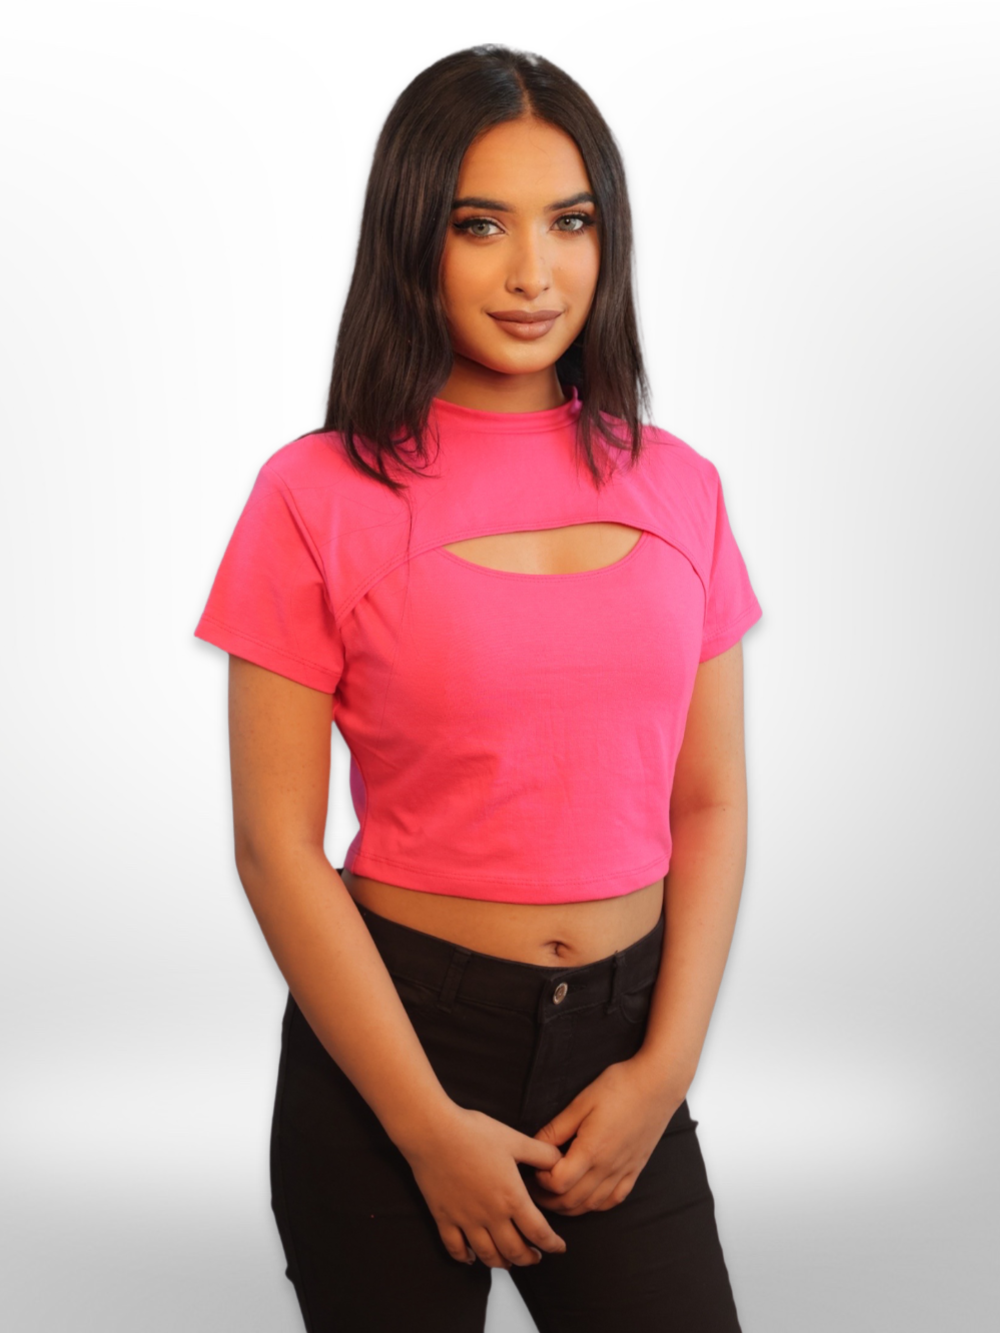 Women Cut Out Crop Tops Half Sleeve - Legacy Boutiques